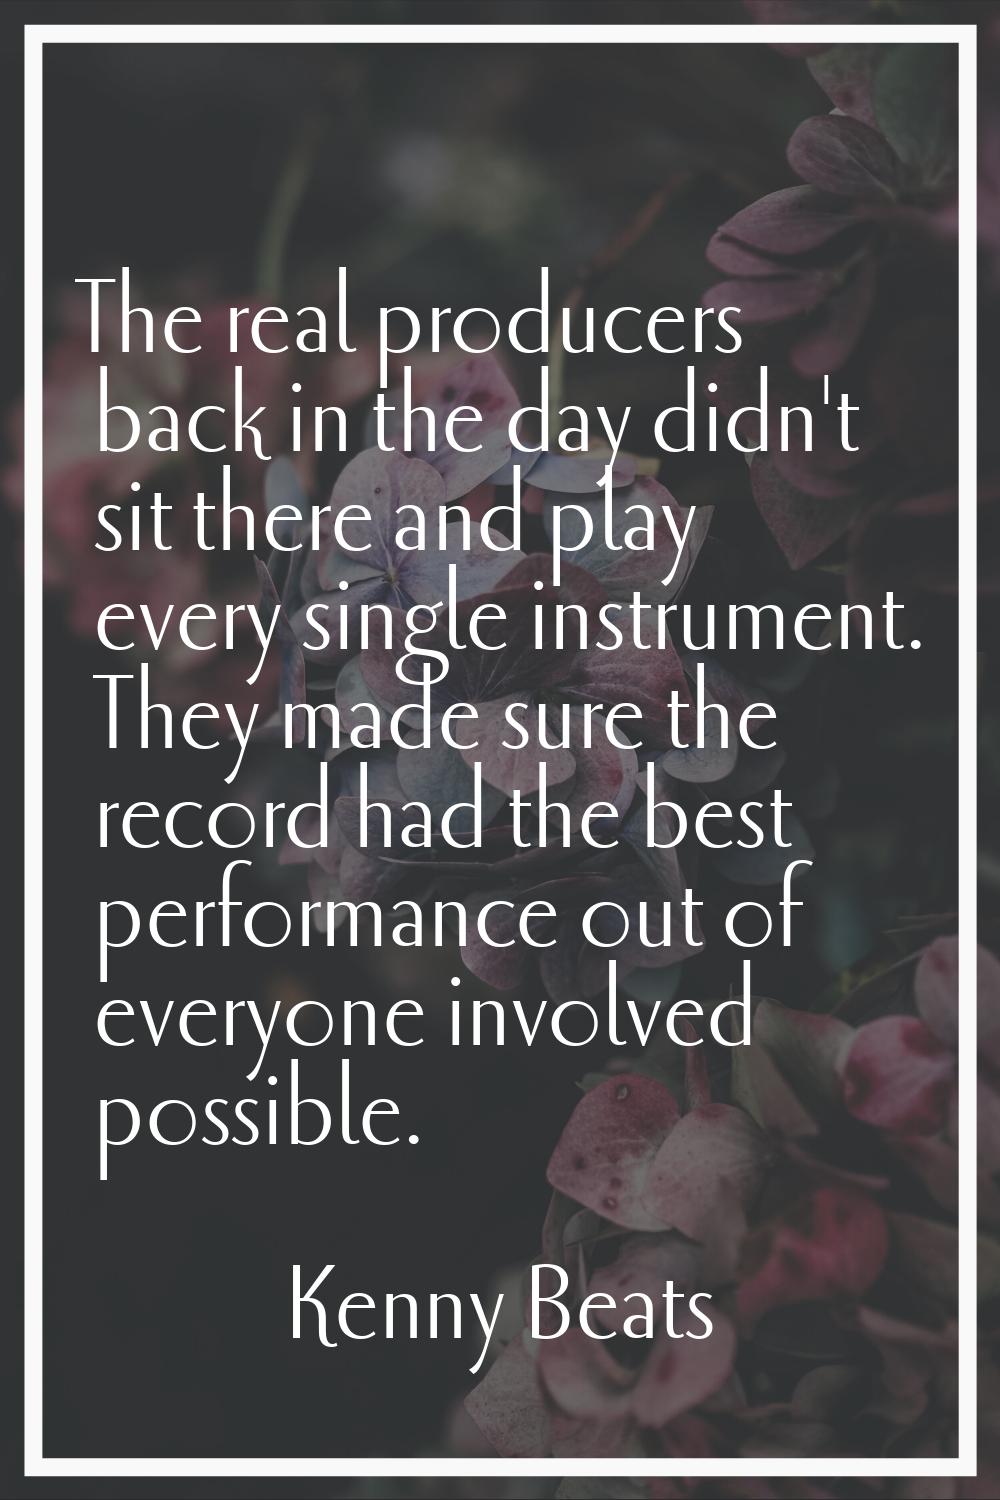 The real producers back in the day didn't sit there and play every single instrument. They made sur